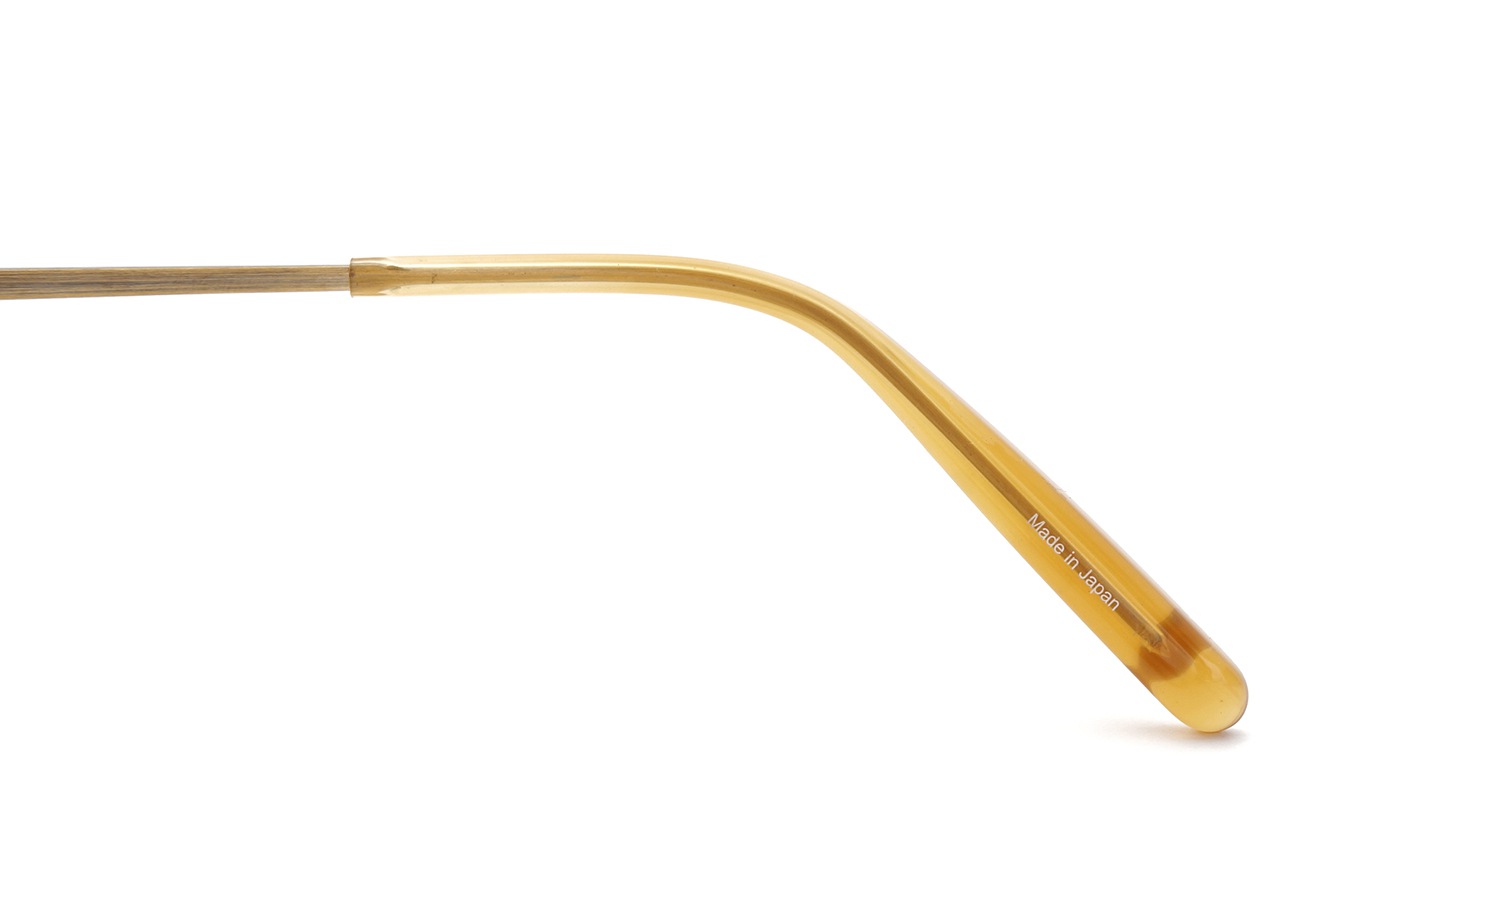 OLIVER PEOPLES × THE ROW サングラス EMPIRE-SUITE AG/BL 49size